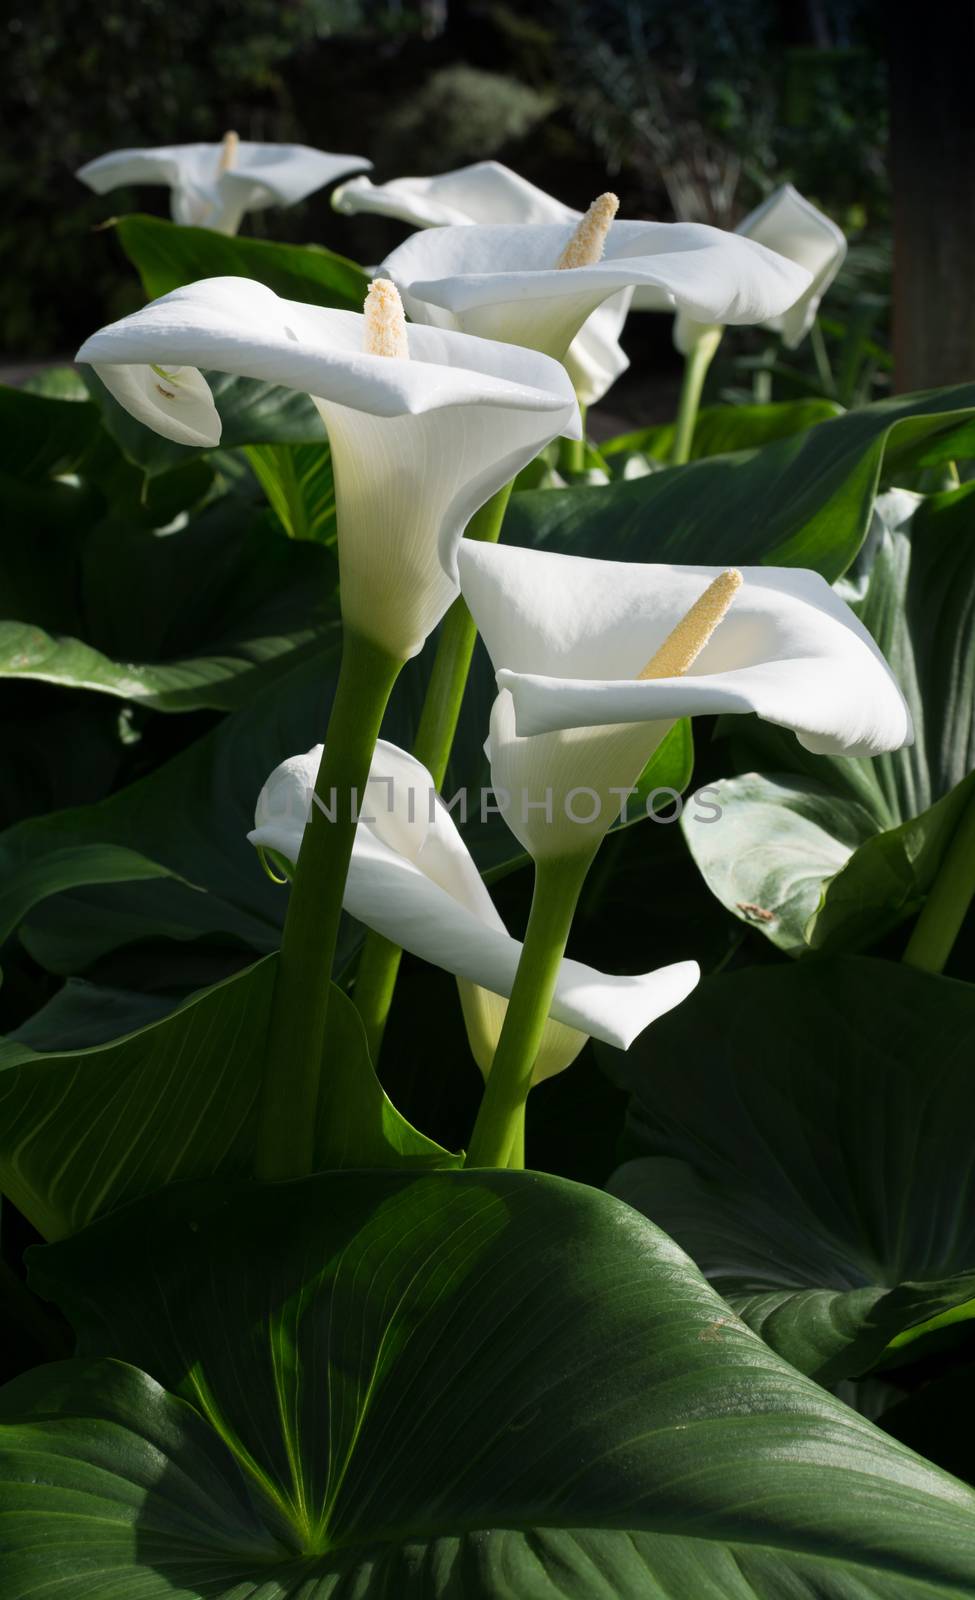 White calla lilies vertical image by ArtesiaWells